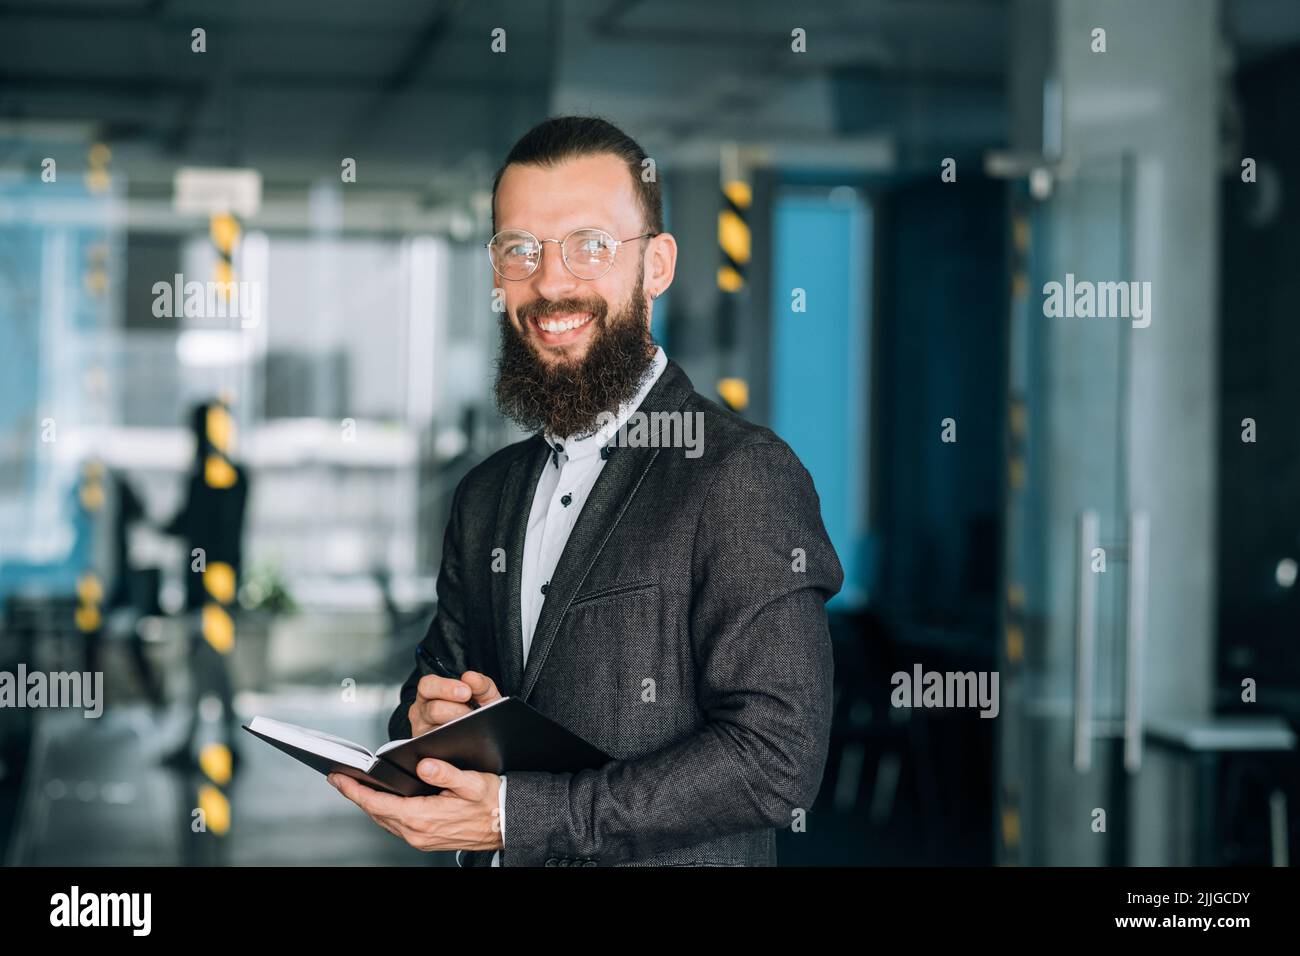 man hold notebook pen business plan strategy Stock Photo